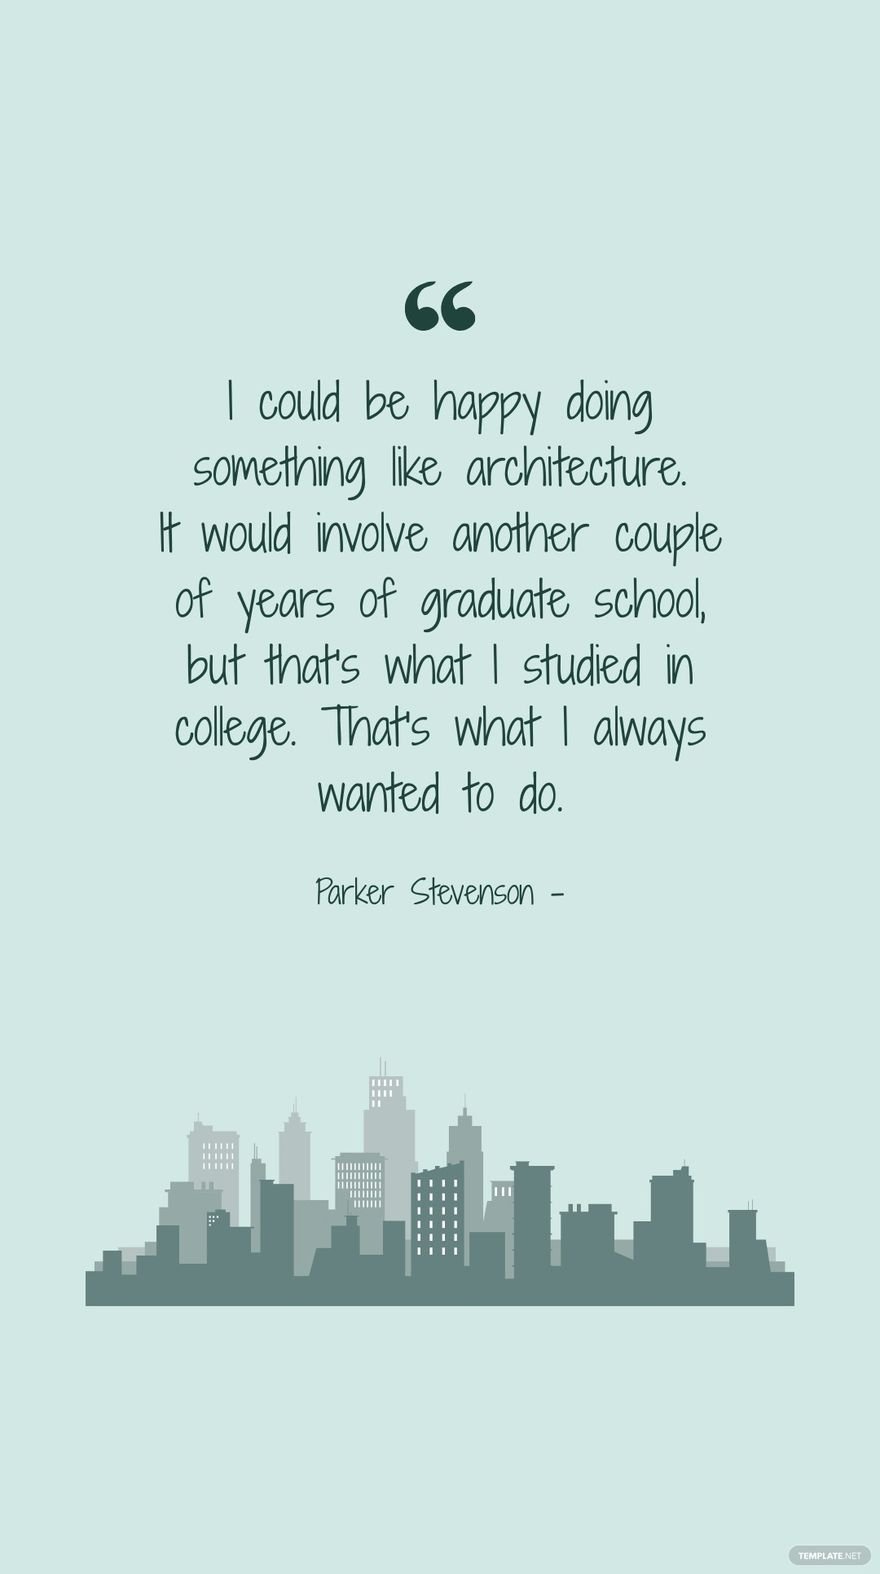 Parker Stevenson - I could be happy doing something like architecture. It would involve another couple of years of graduate school, but that's what I studied in college. That's what I always wanted to